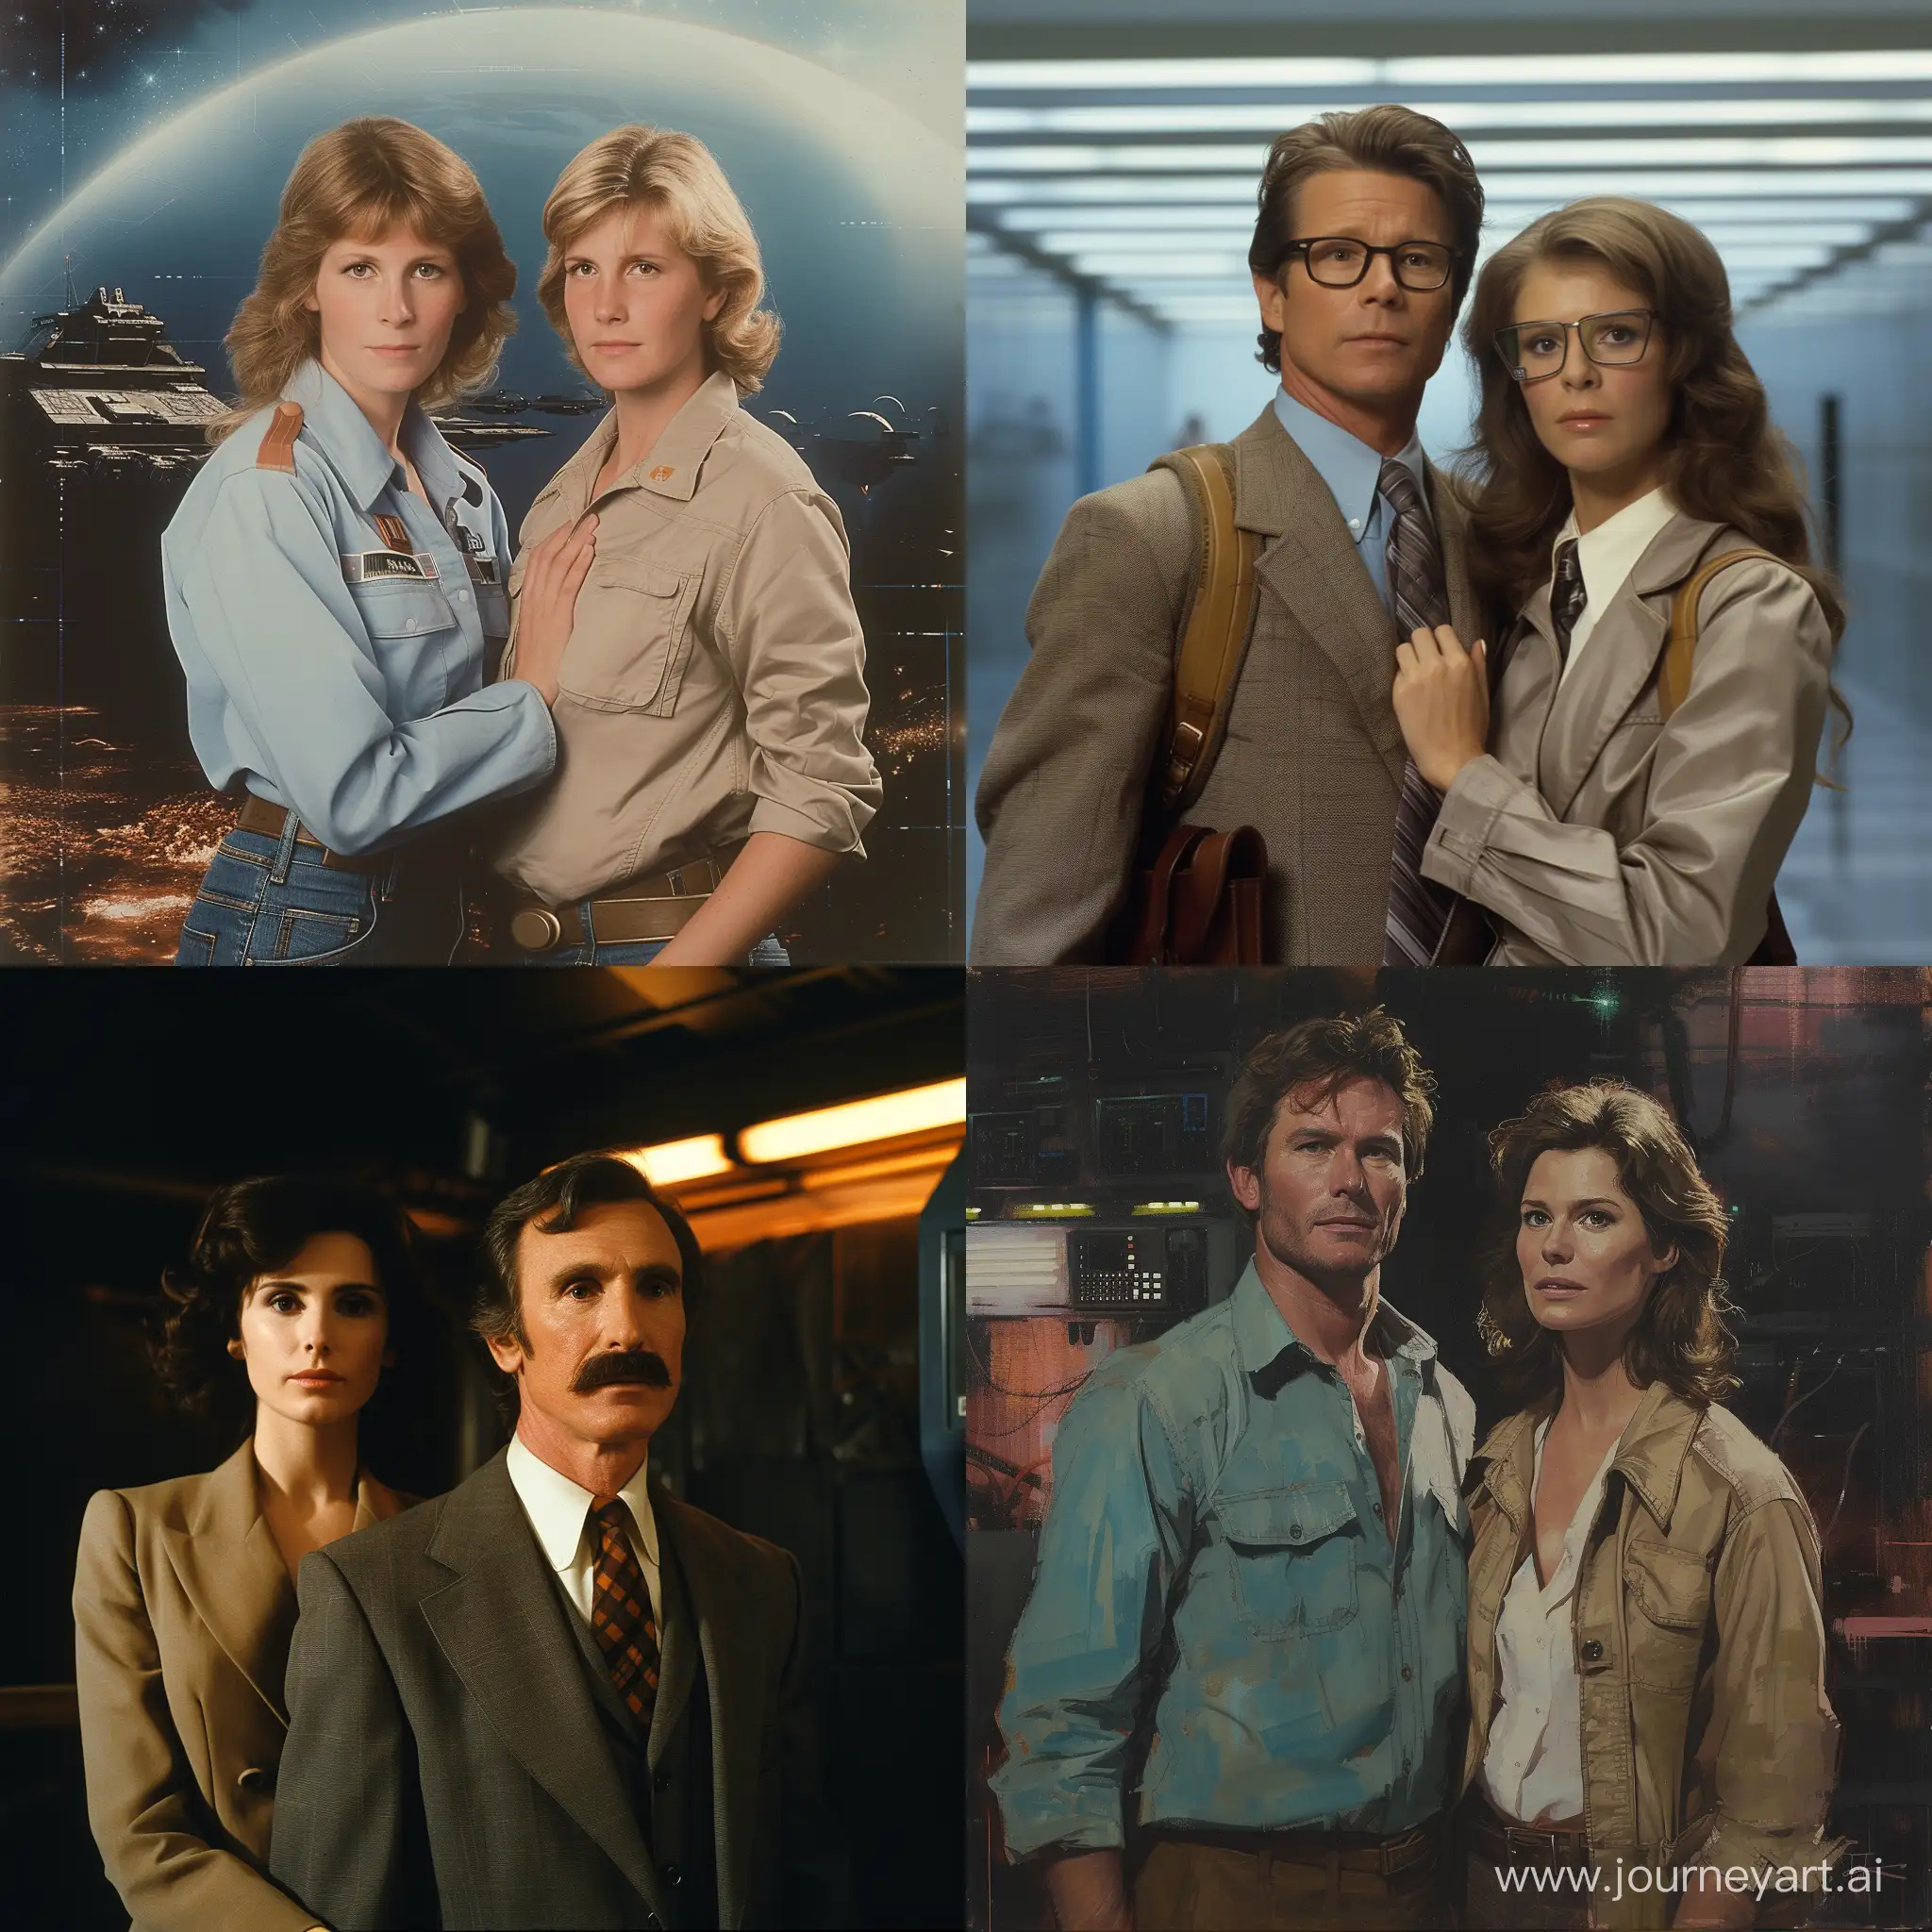 Cave-Johnson-and-Caroline-Portrait-from-Portal-2-in-1980s-Style